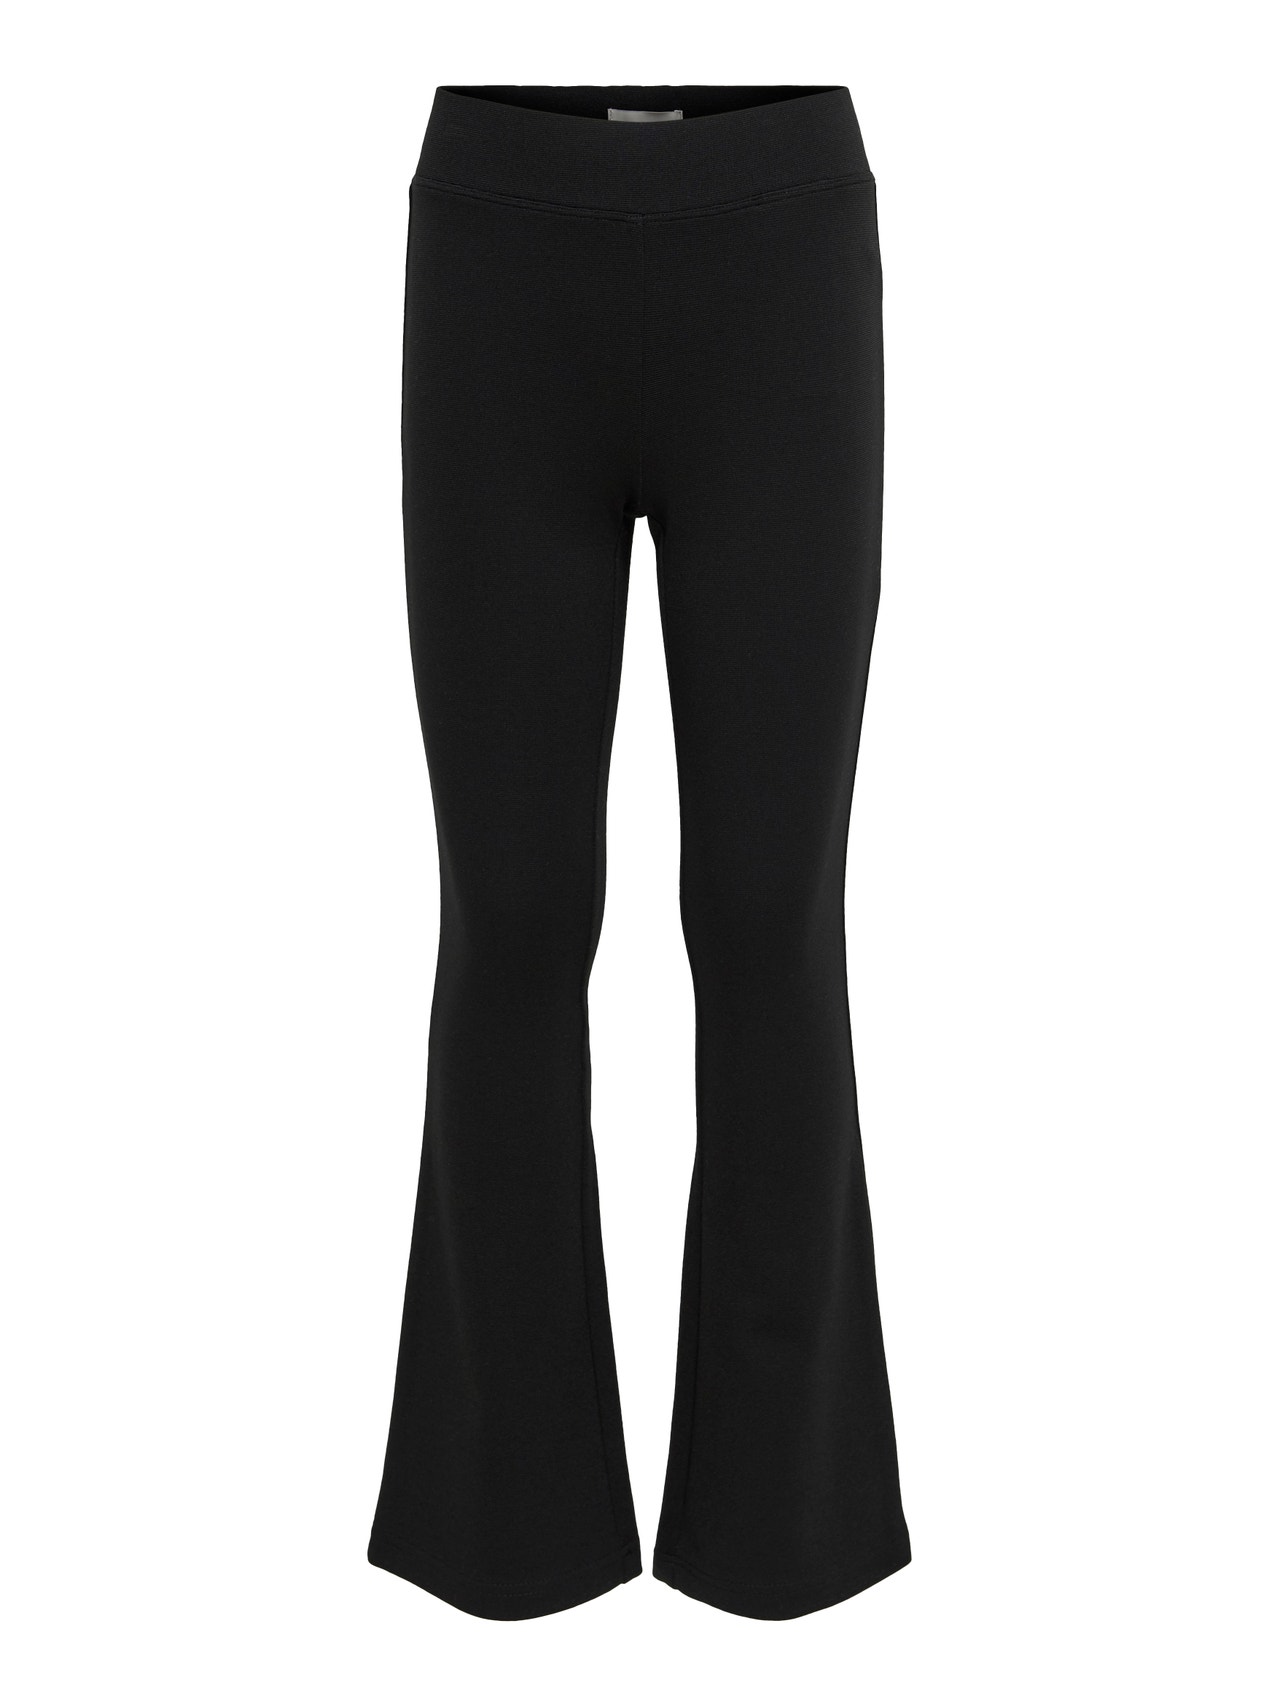 ONLY flared Trousers -Black - 15193010